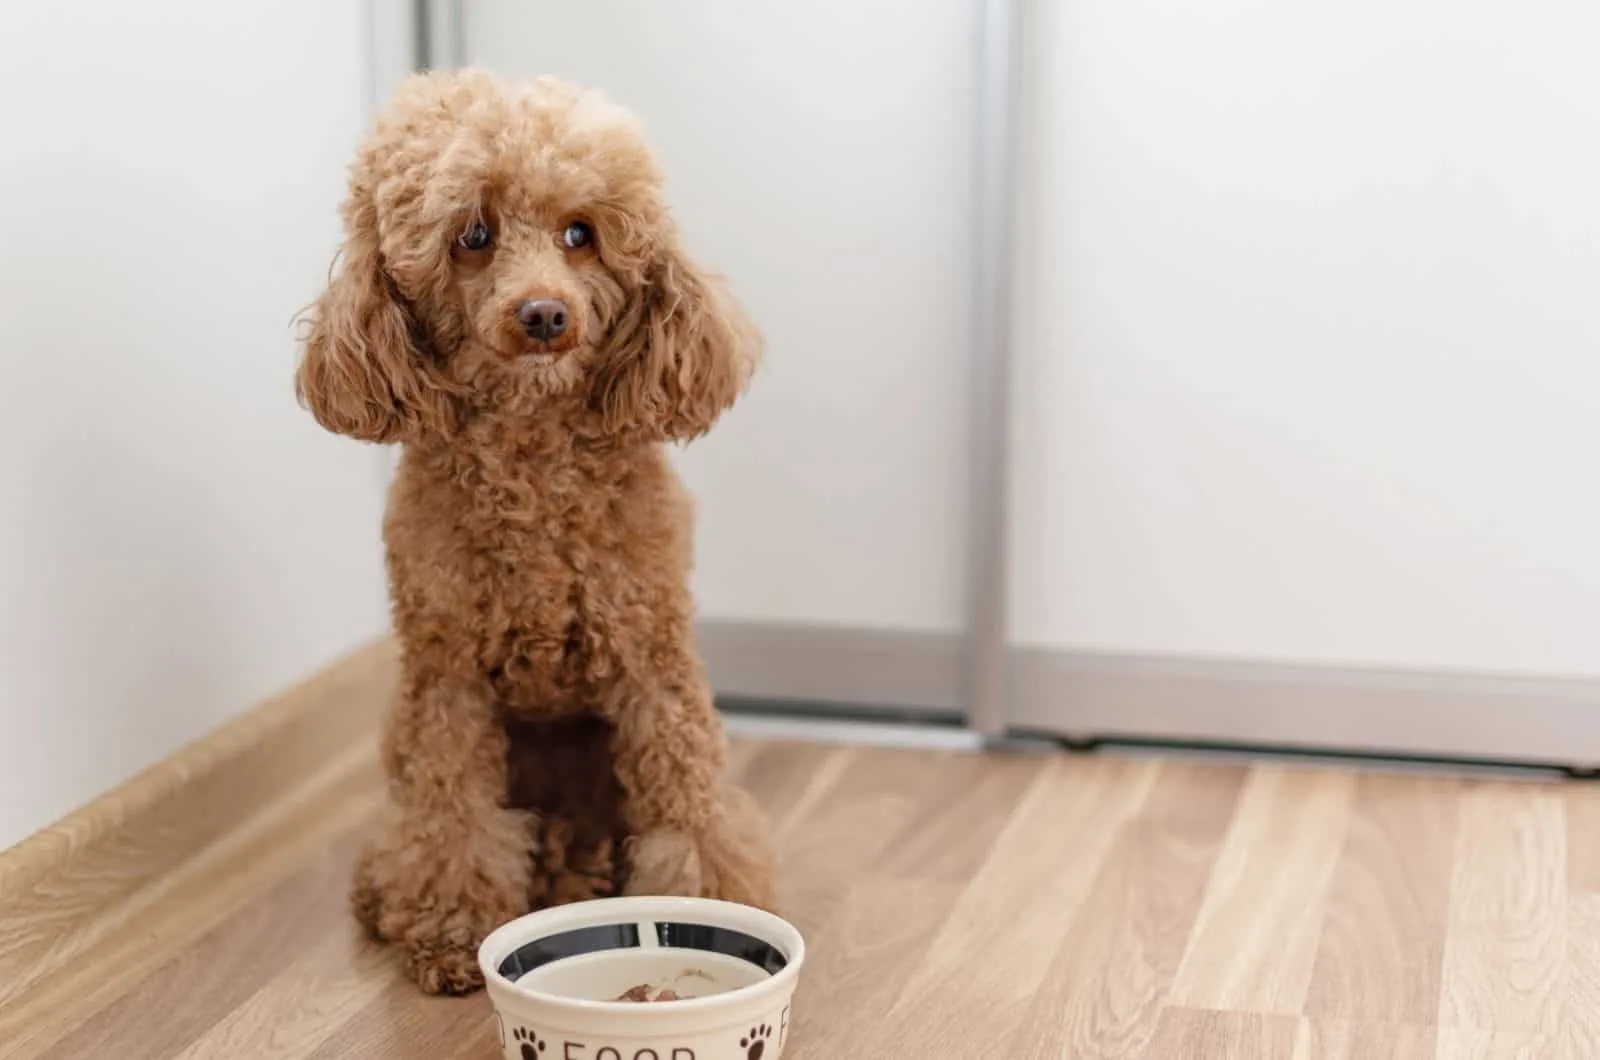 Poodle sitting by bowl with food